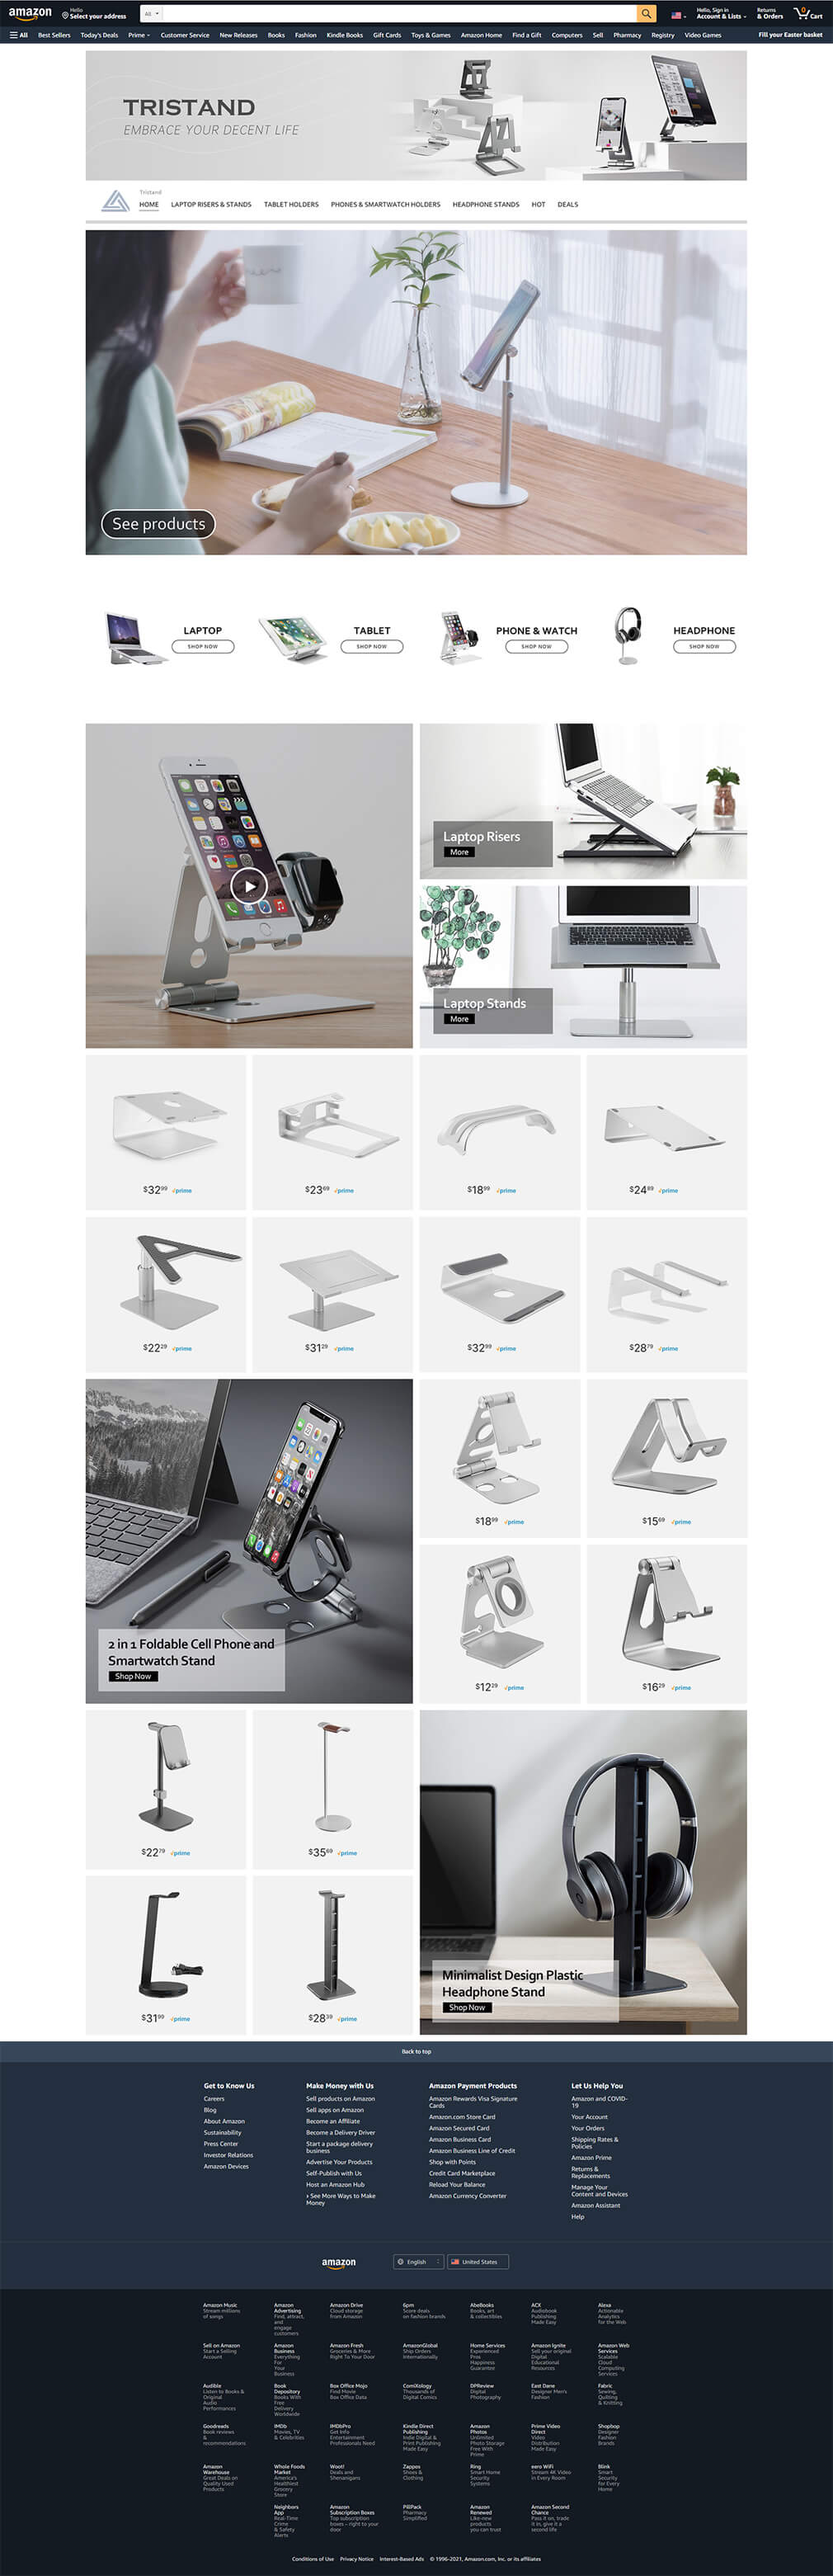 Amazon Storefront Templates-Tristand-Stands&Holders